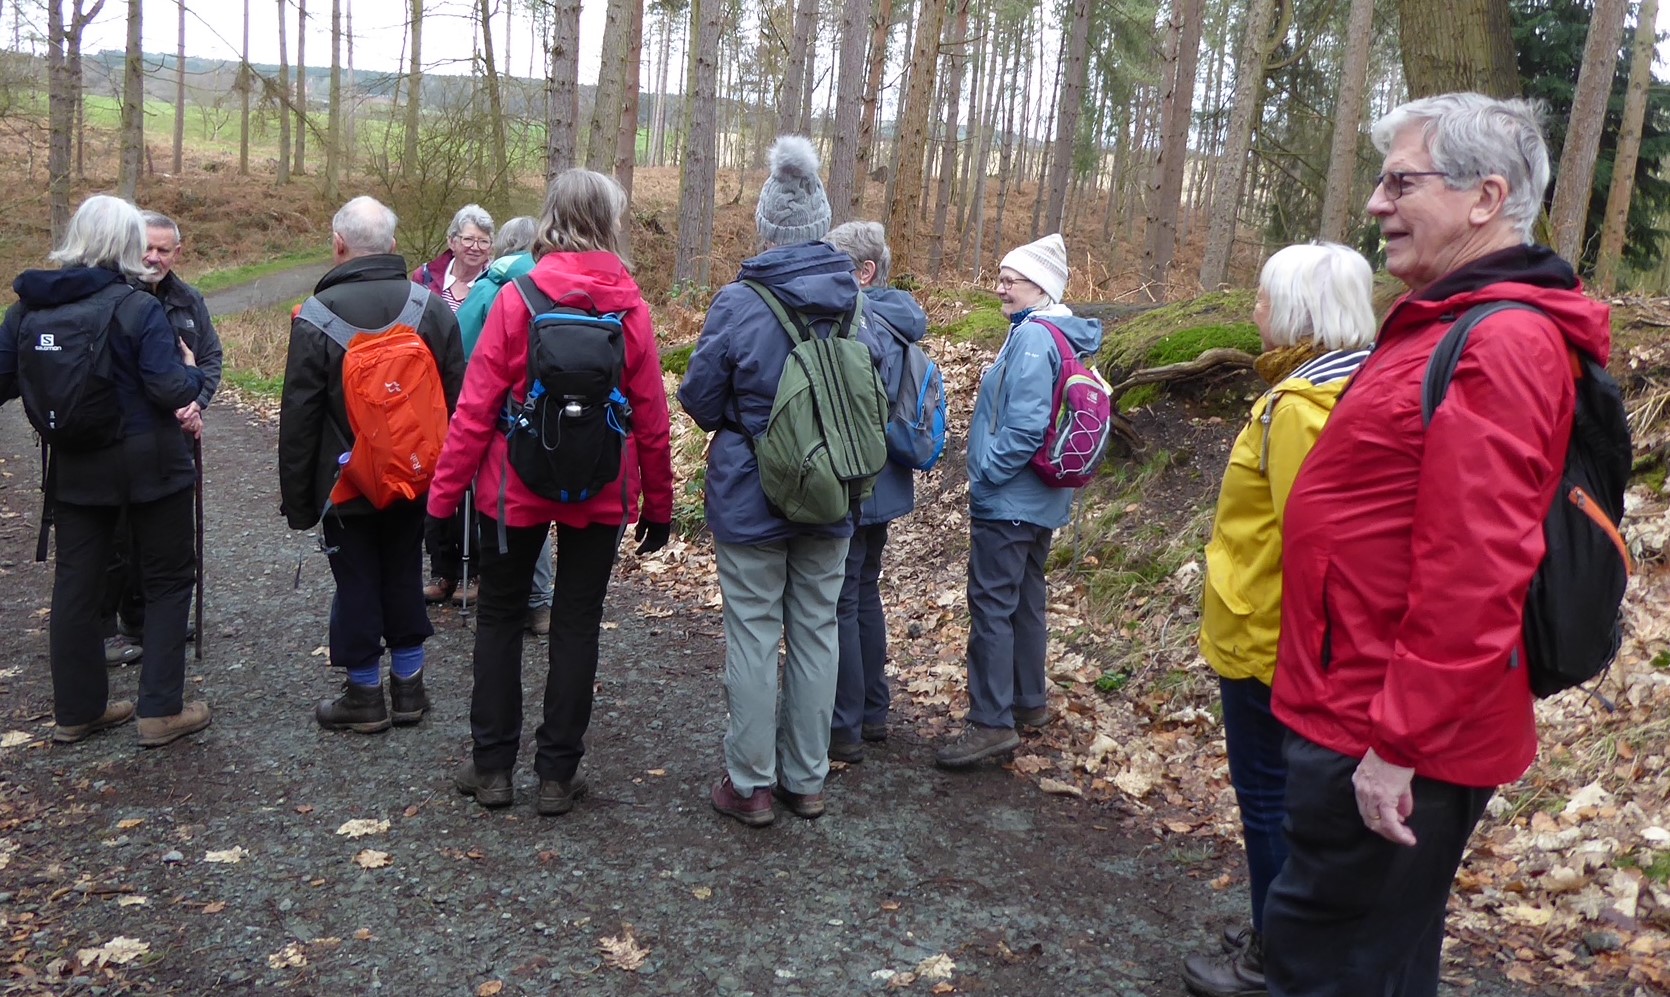 14/3 Stroll in Delamere Forest